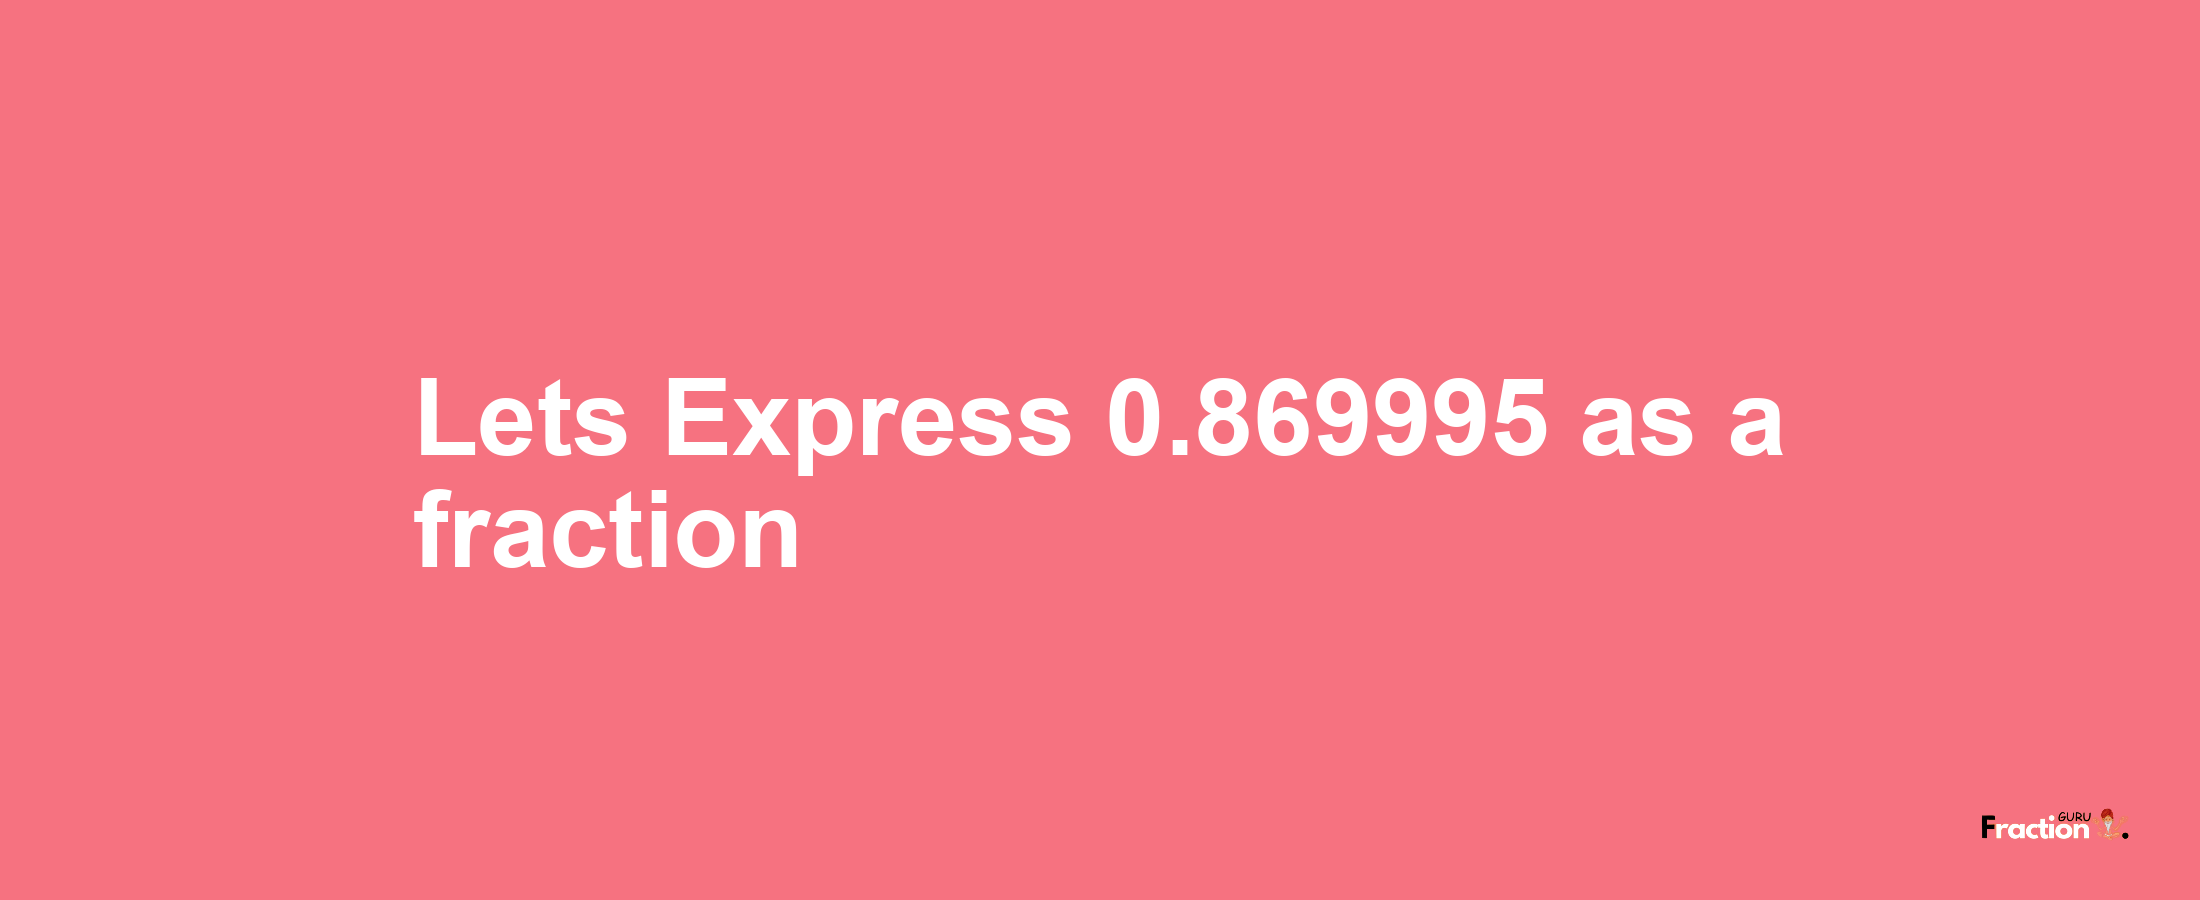 Lets Express 0.869995 as afraction